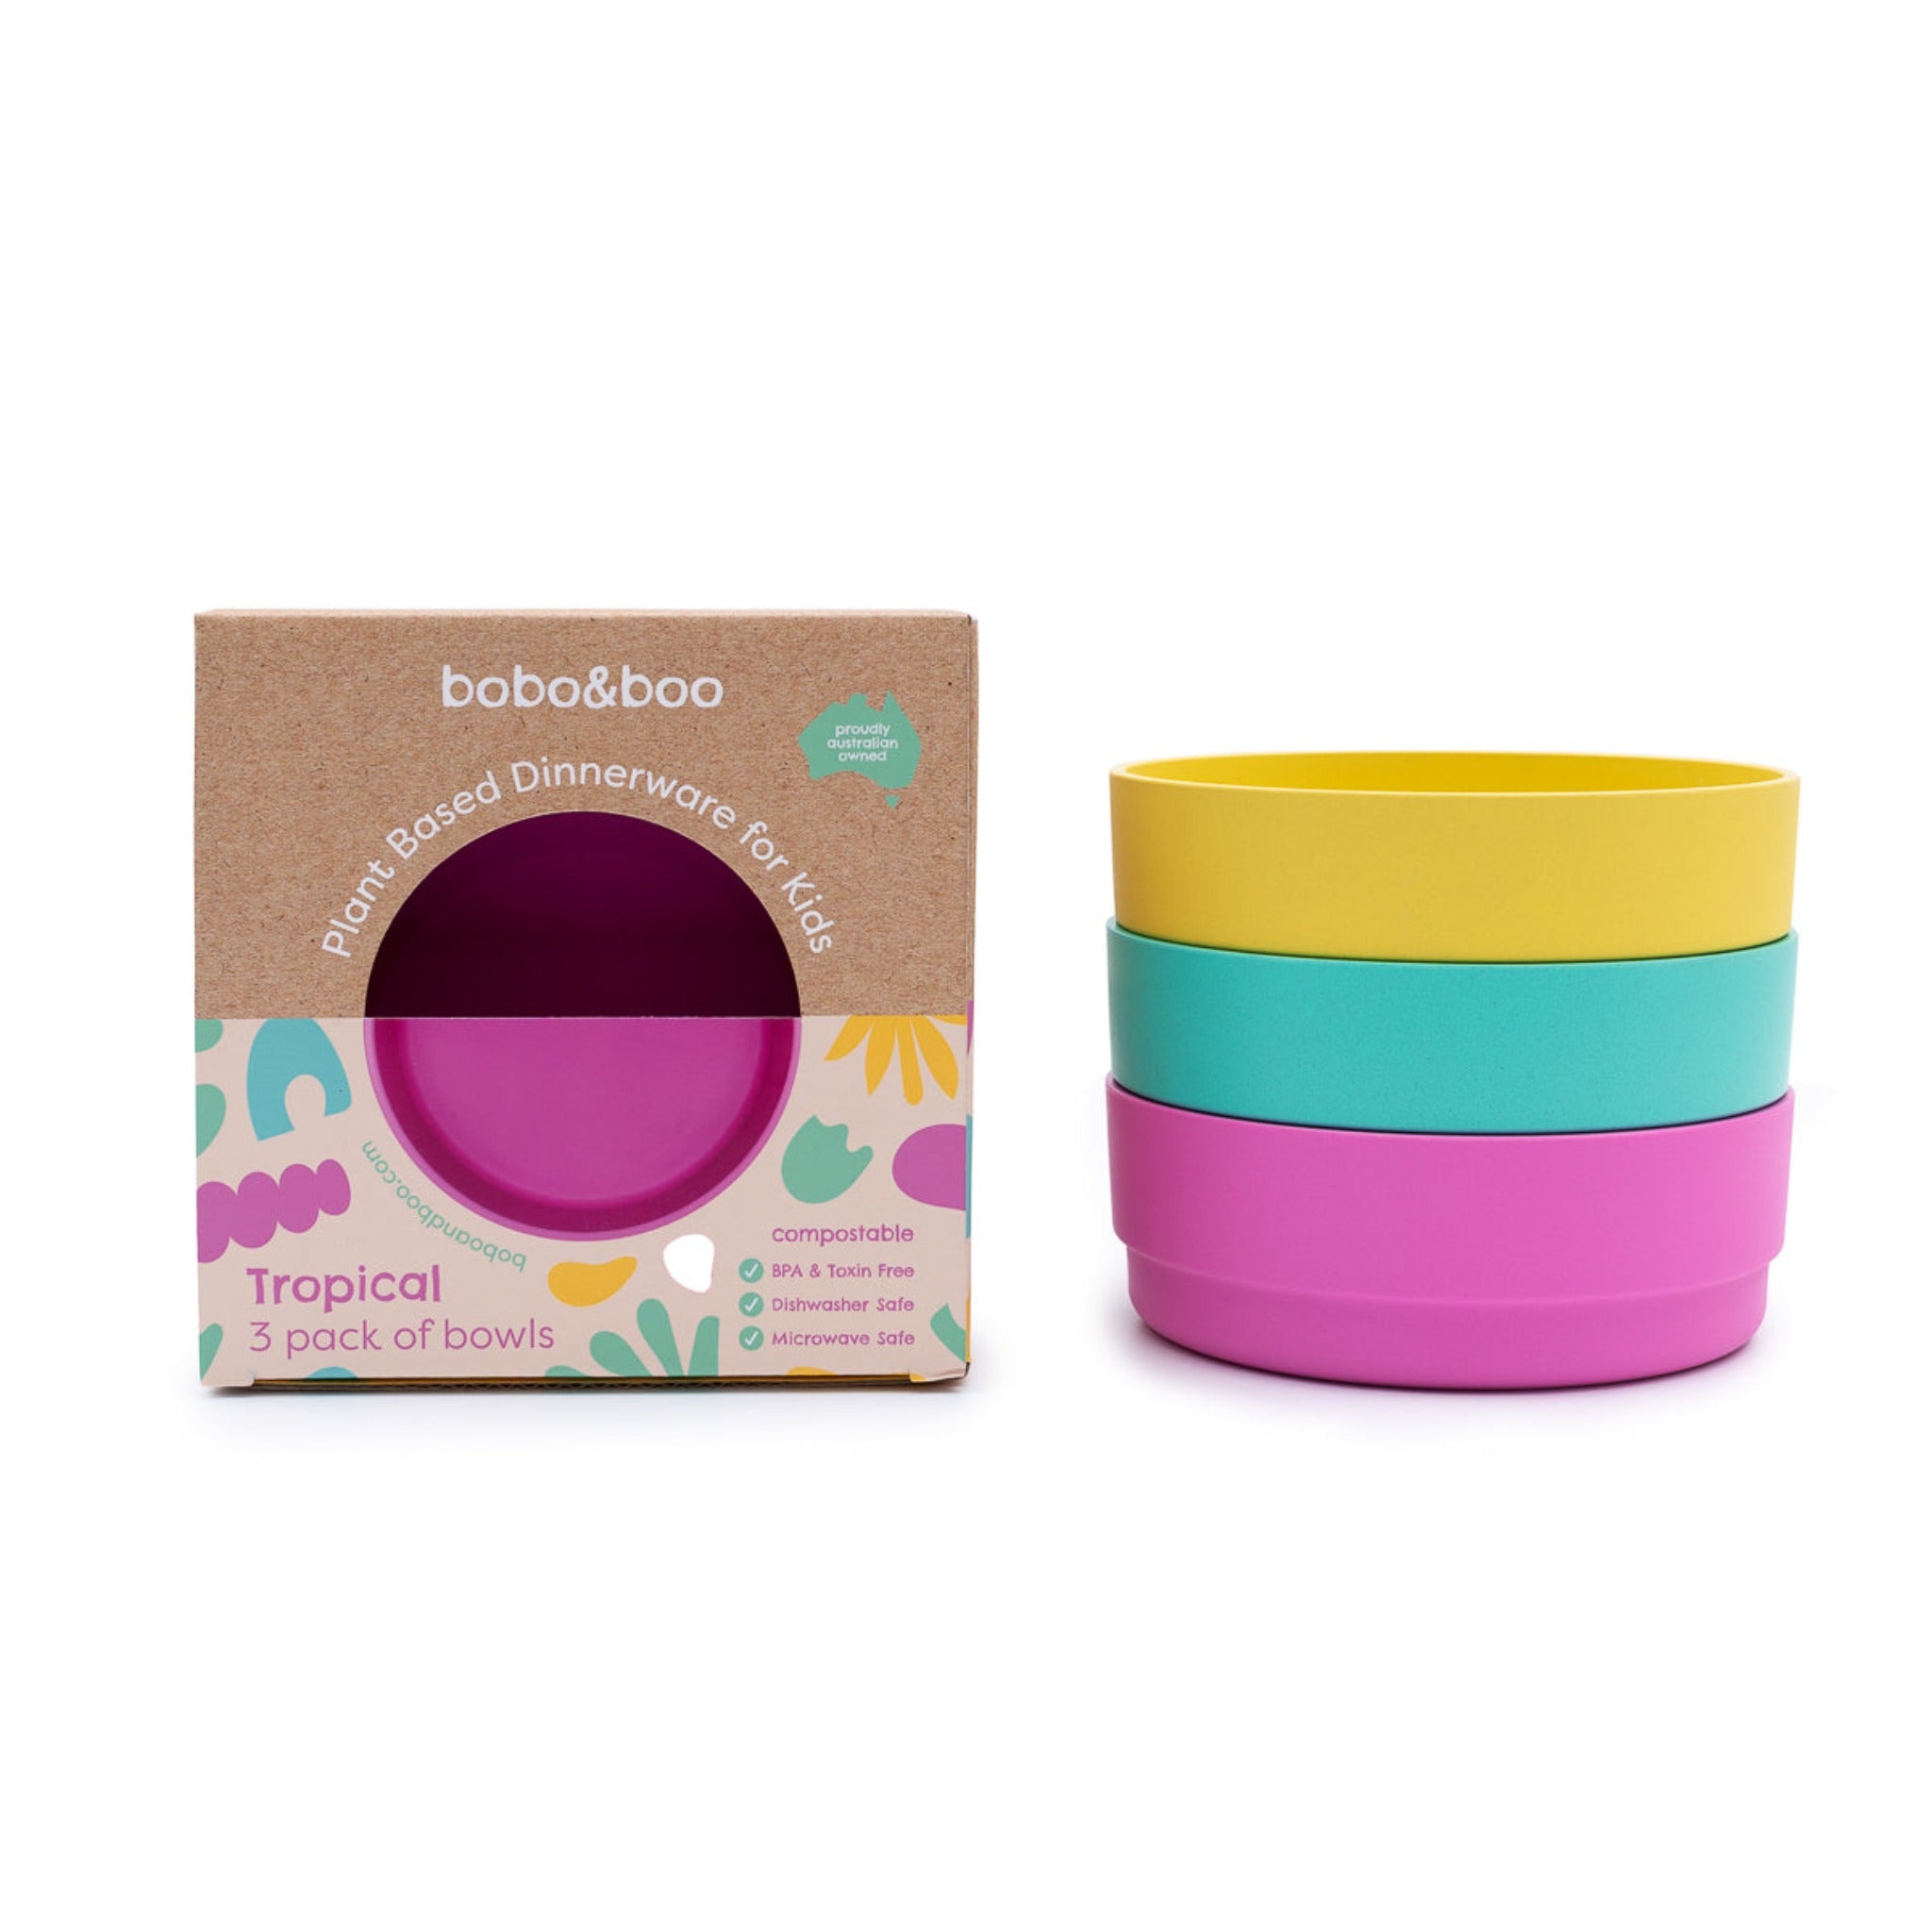 Bobo&Boo Plant-Based Cups for Kids – Melamine and BPA Free - Microwavable and Dishwasher Safe - Eco-Friendly Toddler Drinking Cup Set - Lagoon